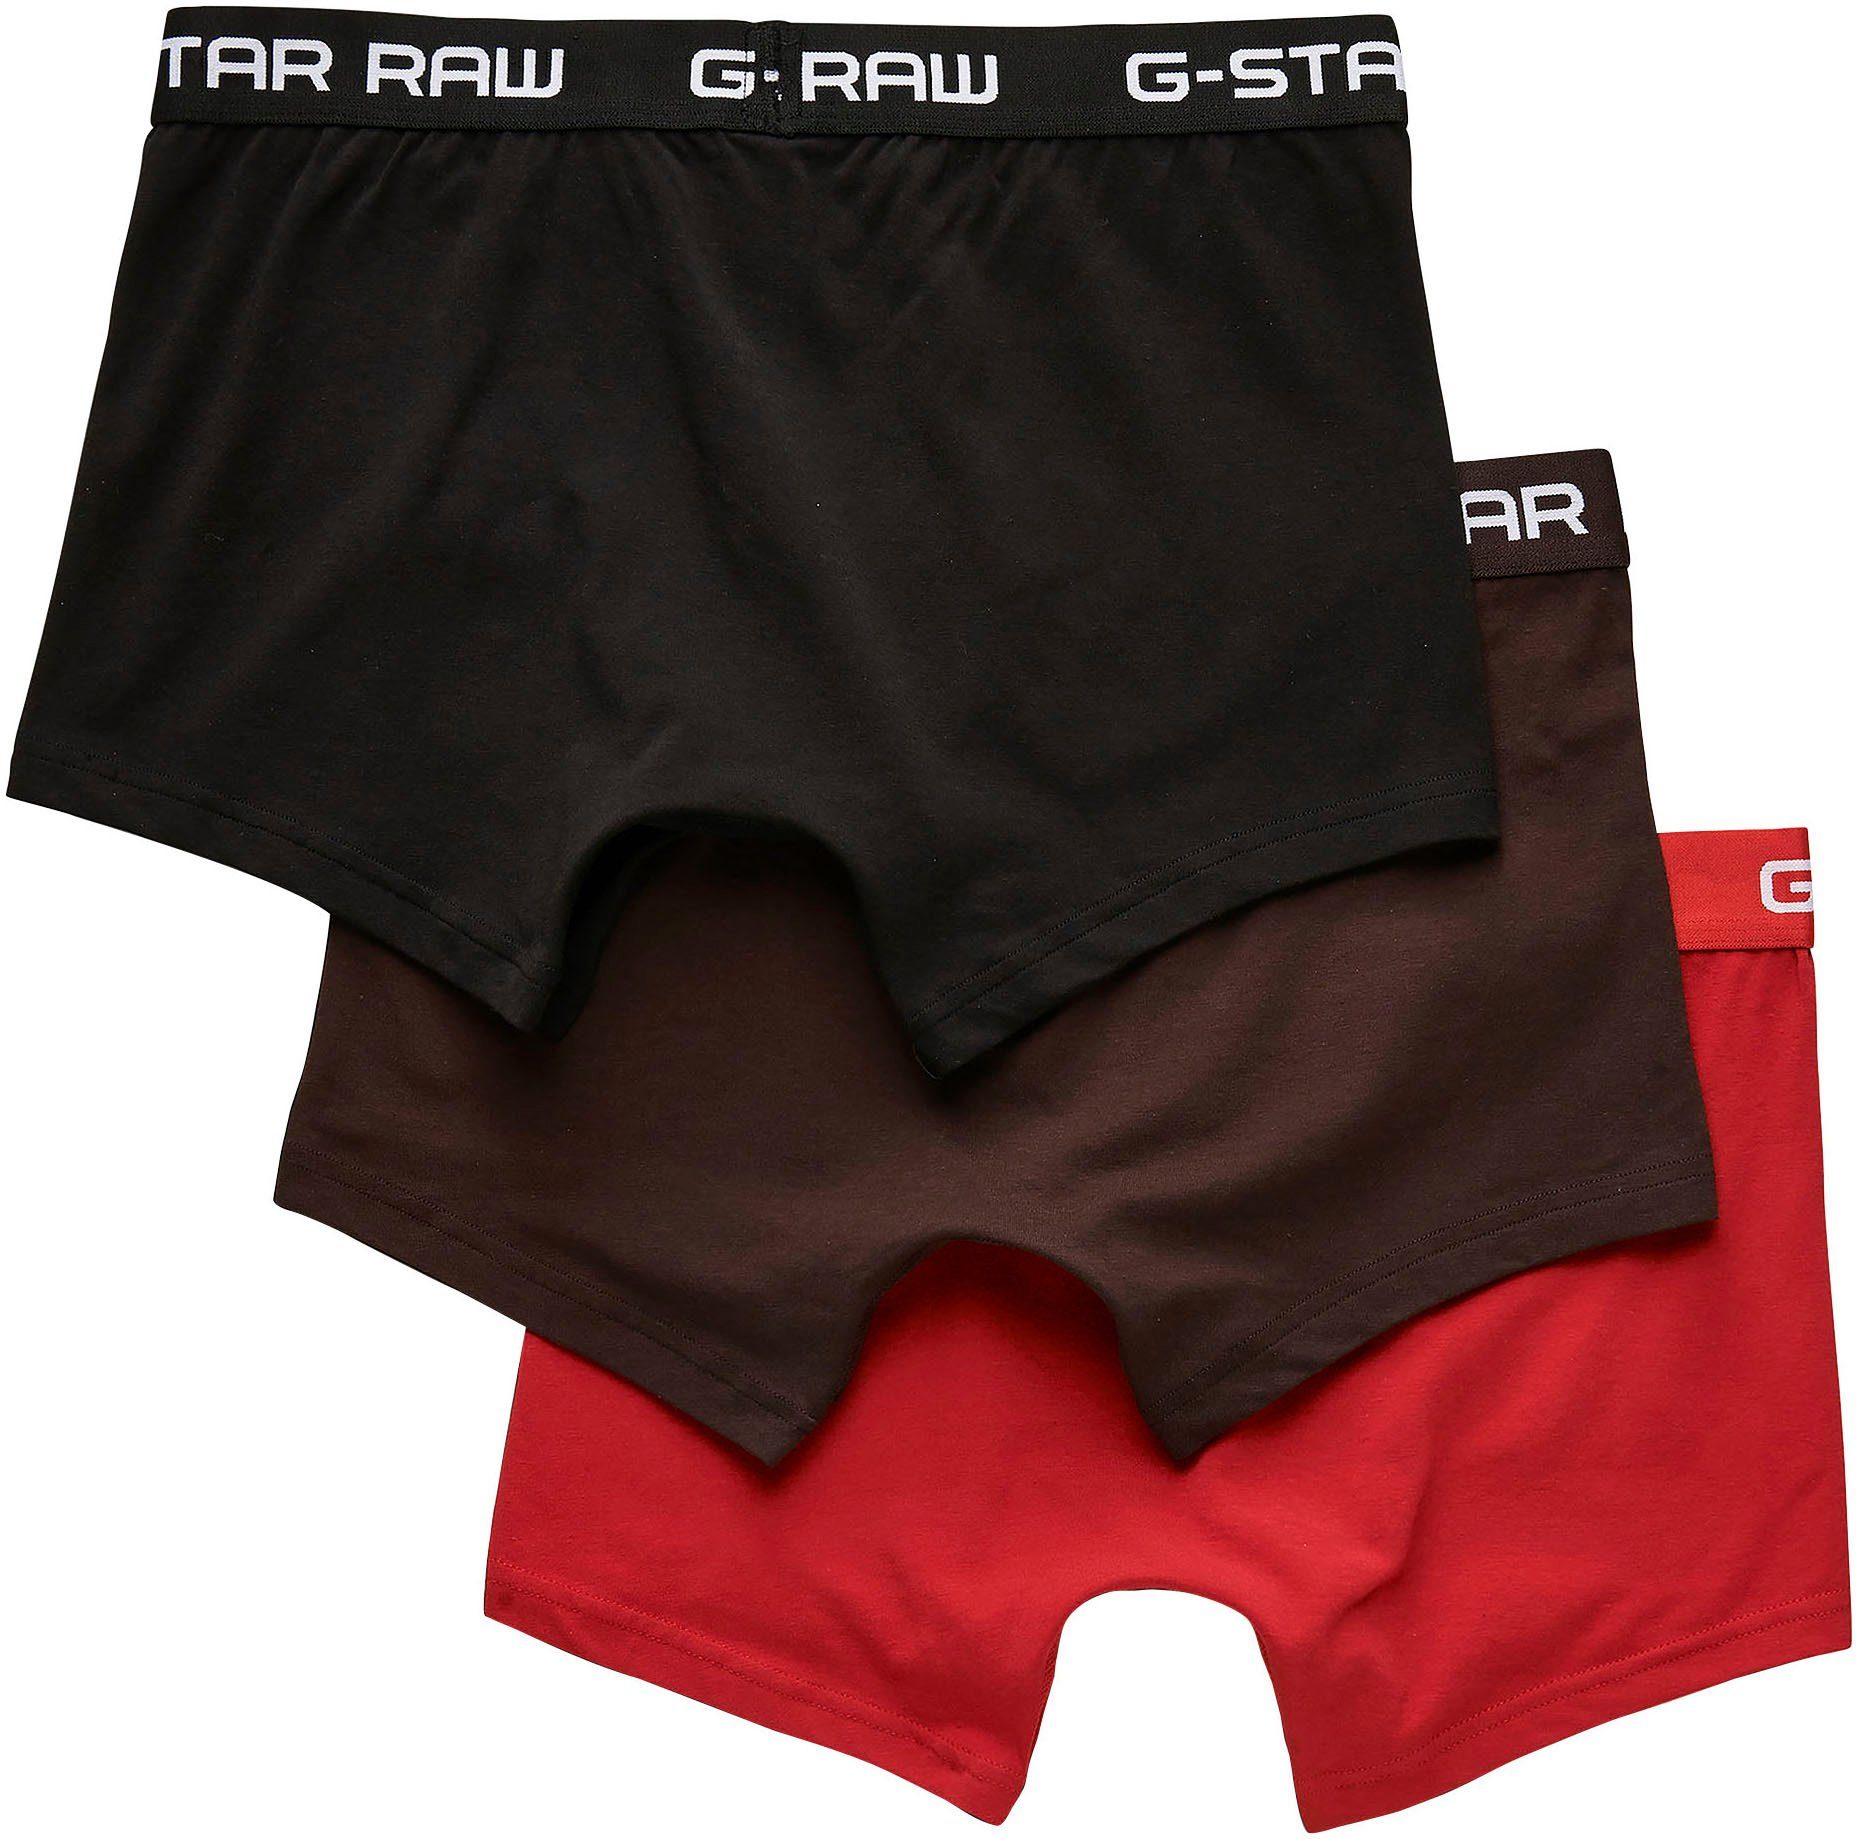 G-Star RAW Boxer Classic trunk clr 3 pack (Packung, 3-St., 3er-Pack) rot, bordeaux, schwarz